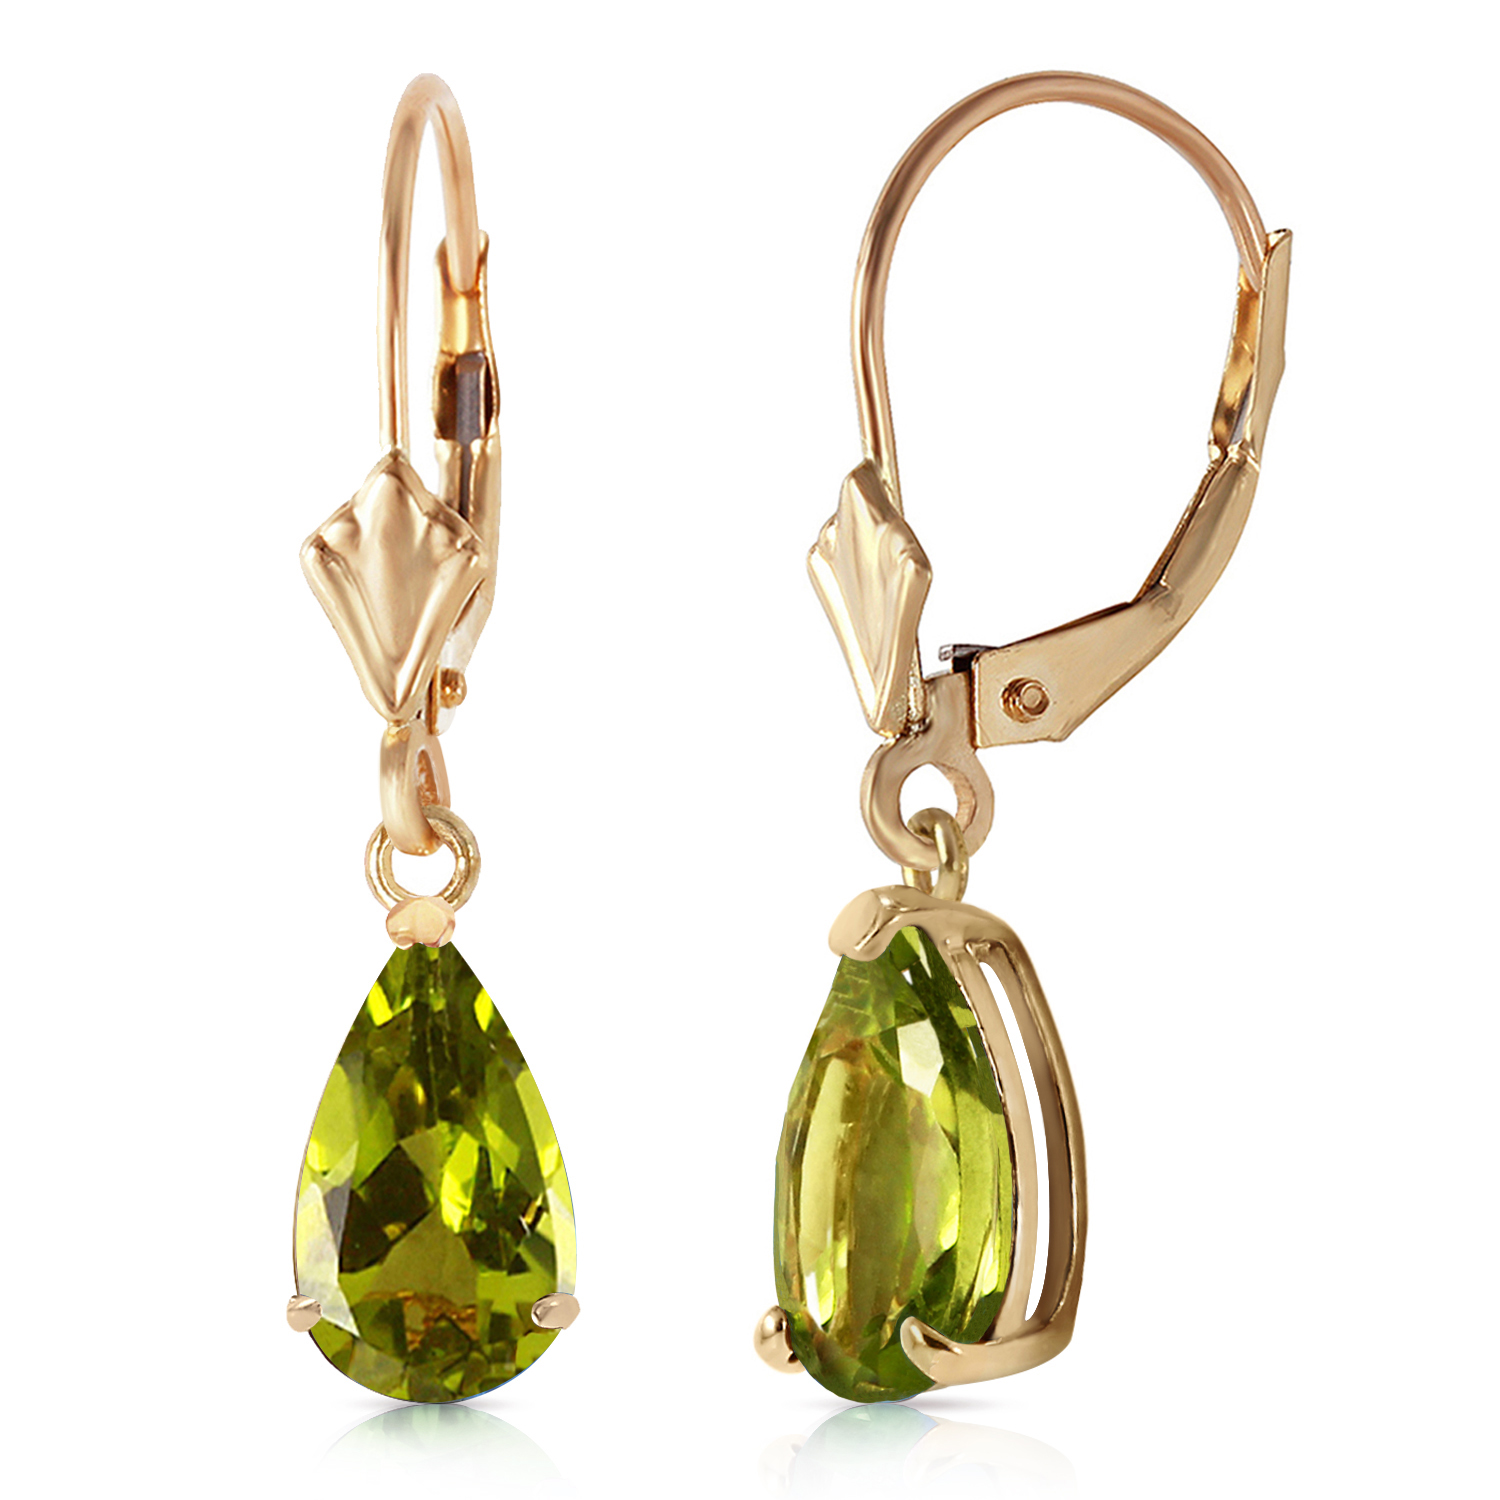 Galaxy Gold Genuine 14k Solid Yellow Gold Earrings Design with 3 Carat Green Grass Peridot Gemstones - image 1 of 3